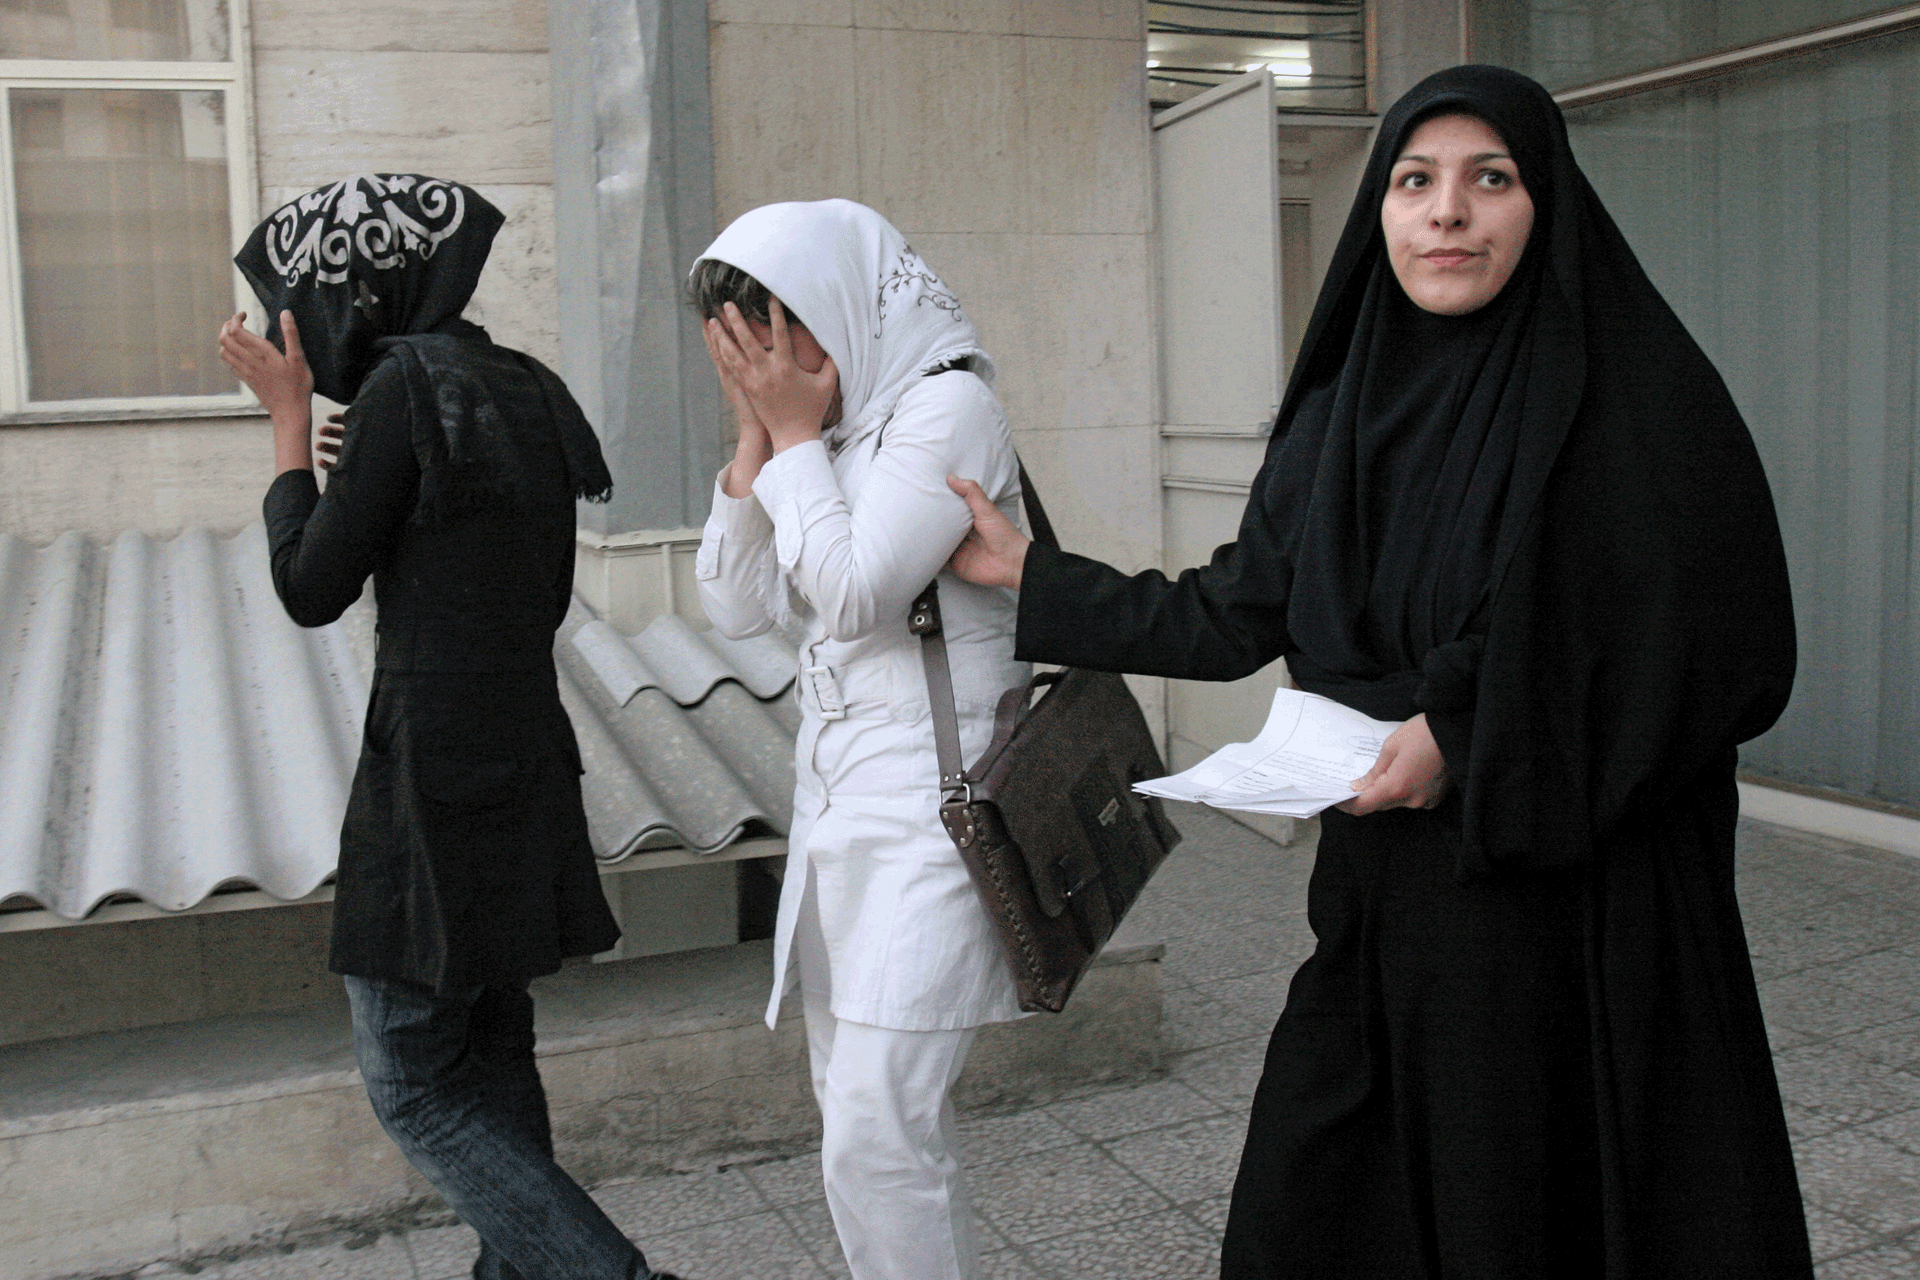 A female police officer leads two young women into a police station